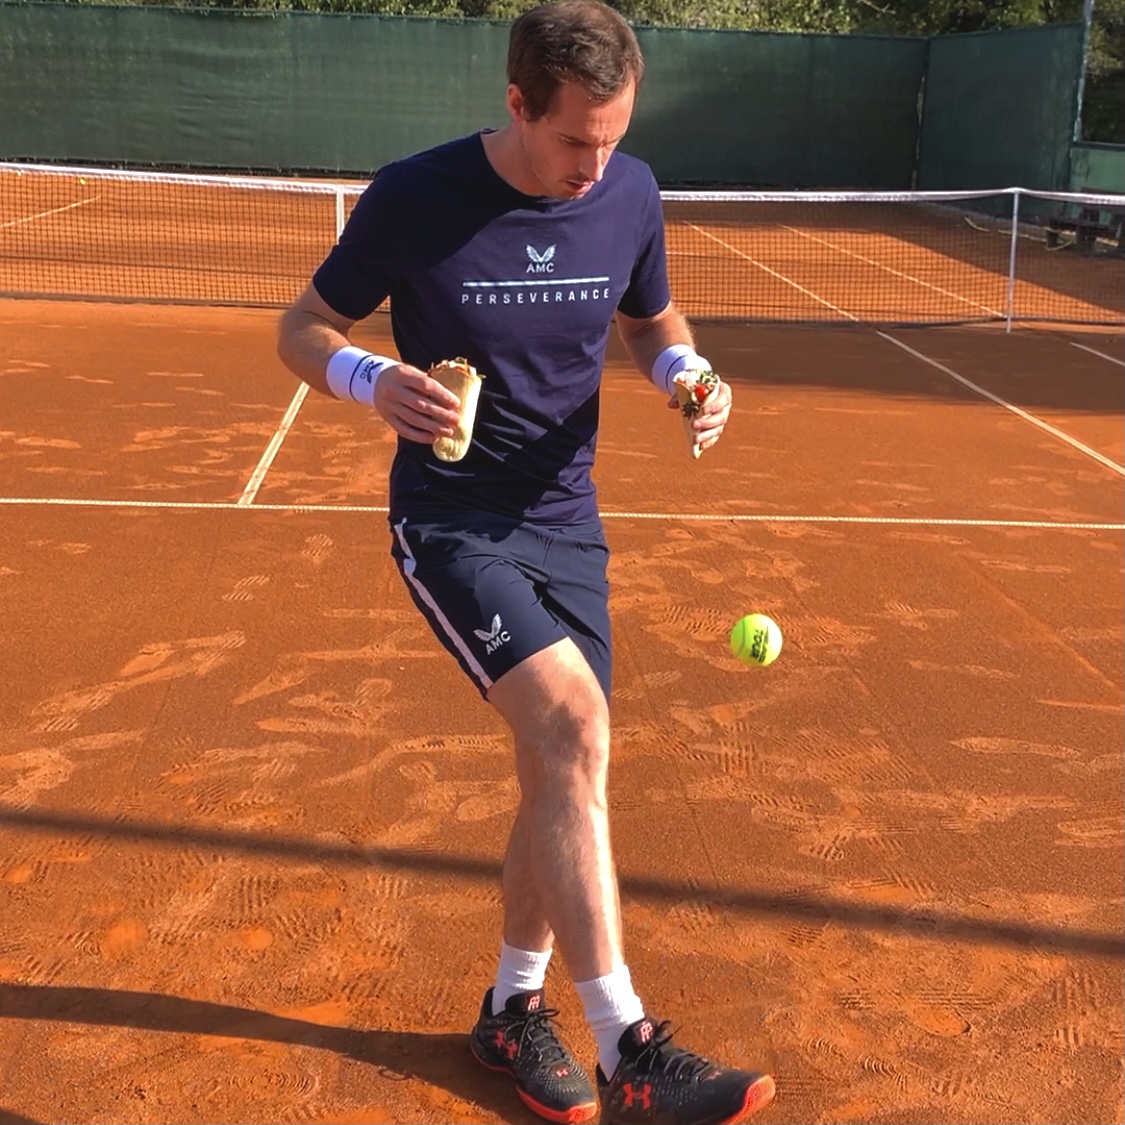 Tennis player bouncing ball on foot while holding tortilla pocket